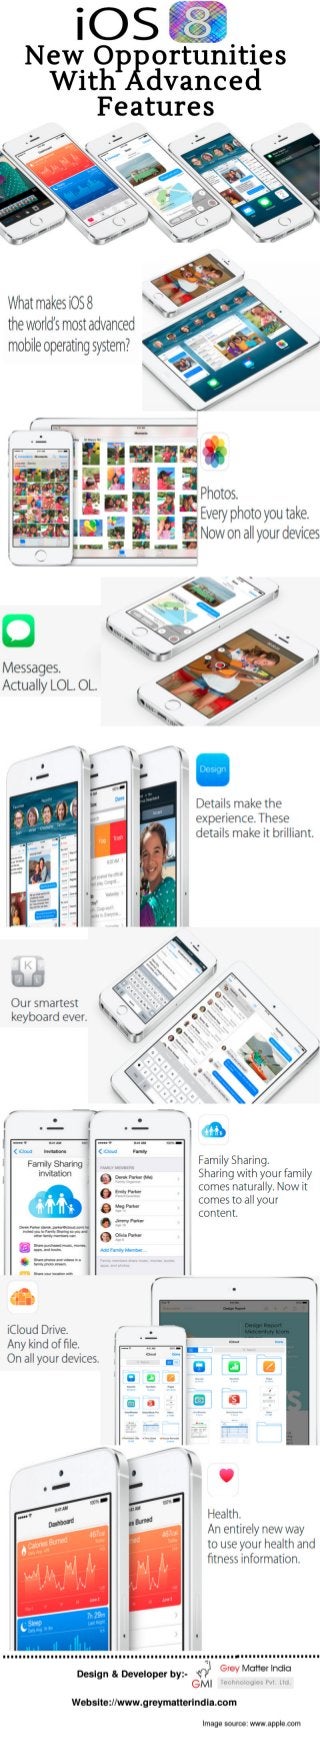 iOS 8 New Opportunities With Advanced Features